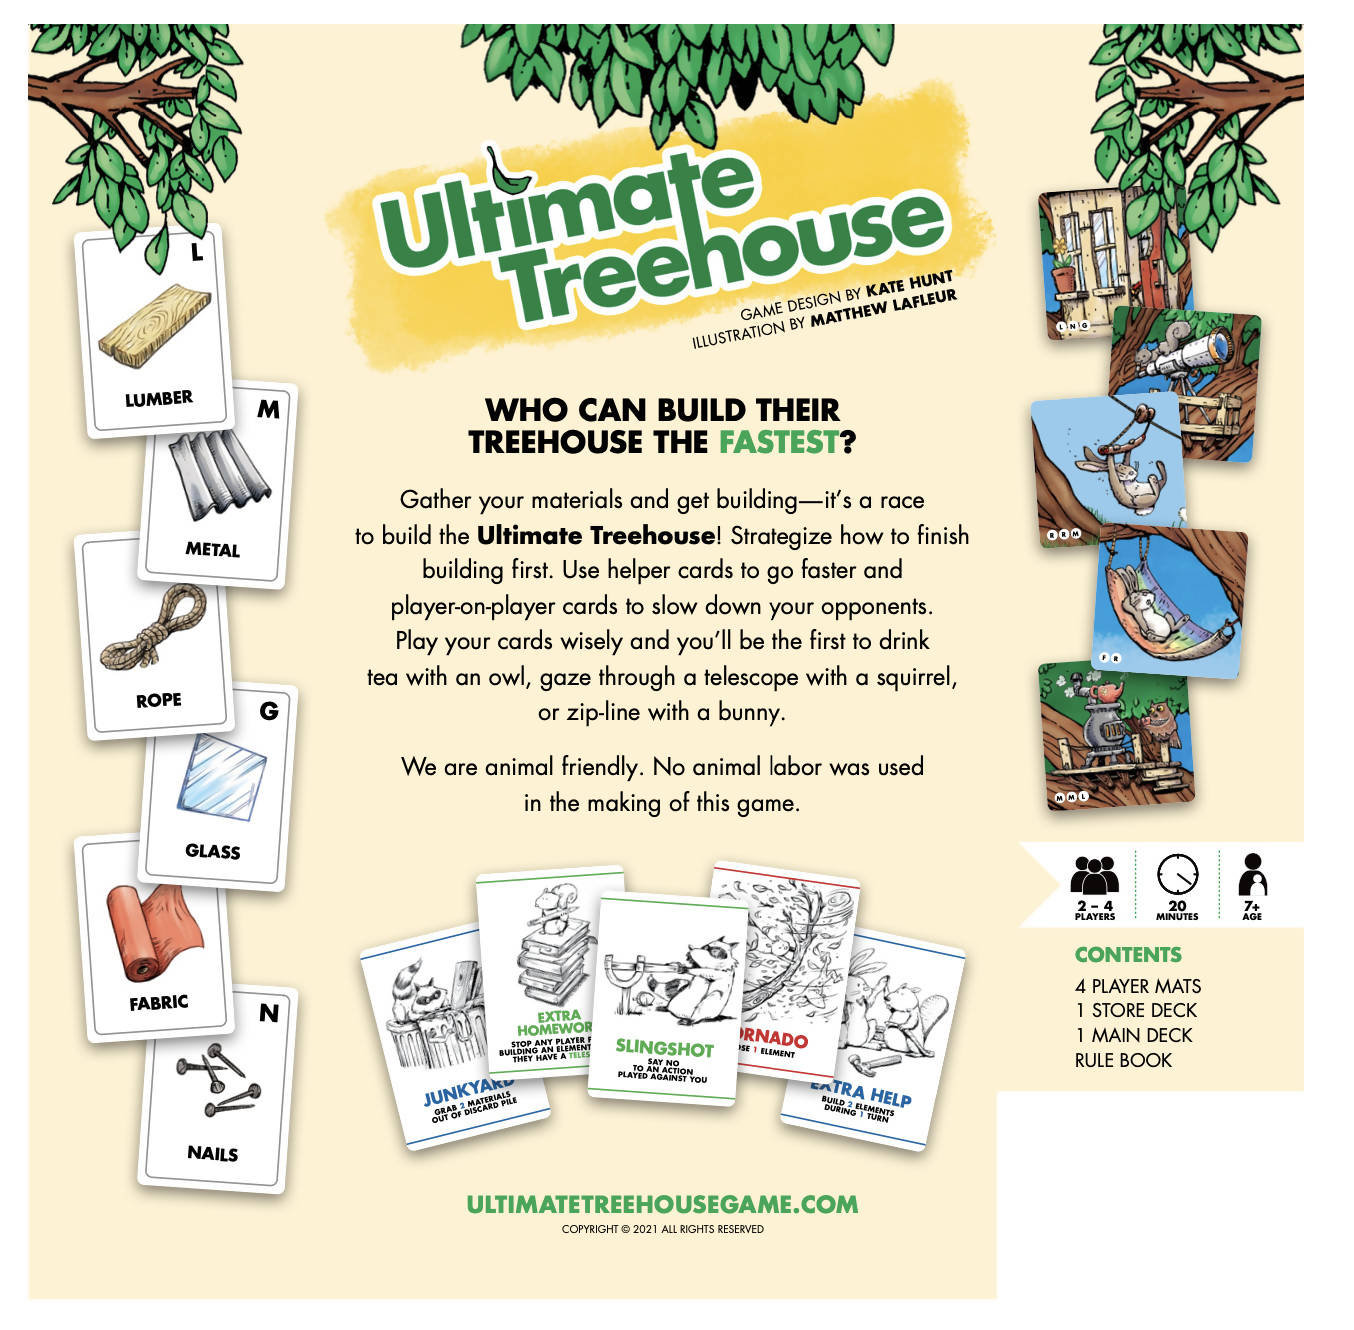 Ultimate Treehouse game